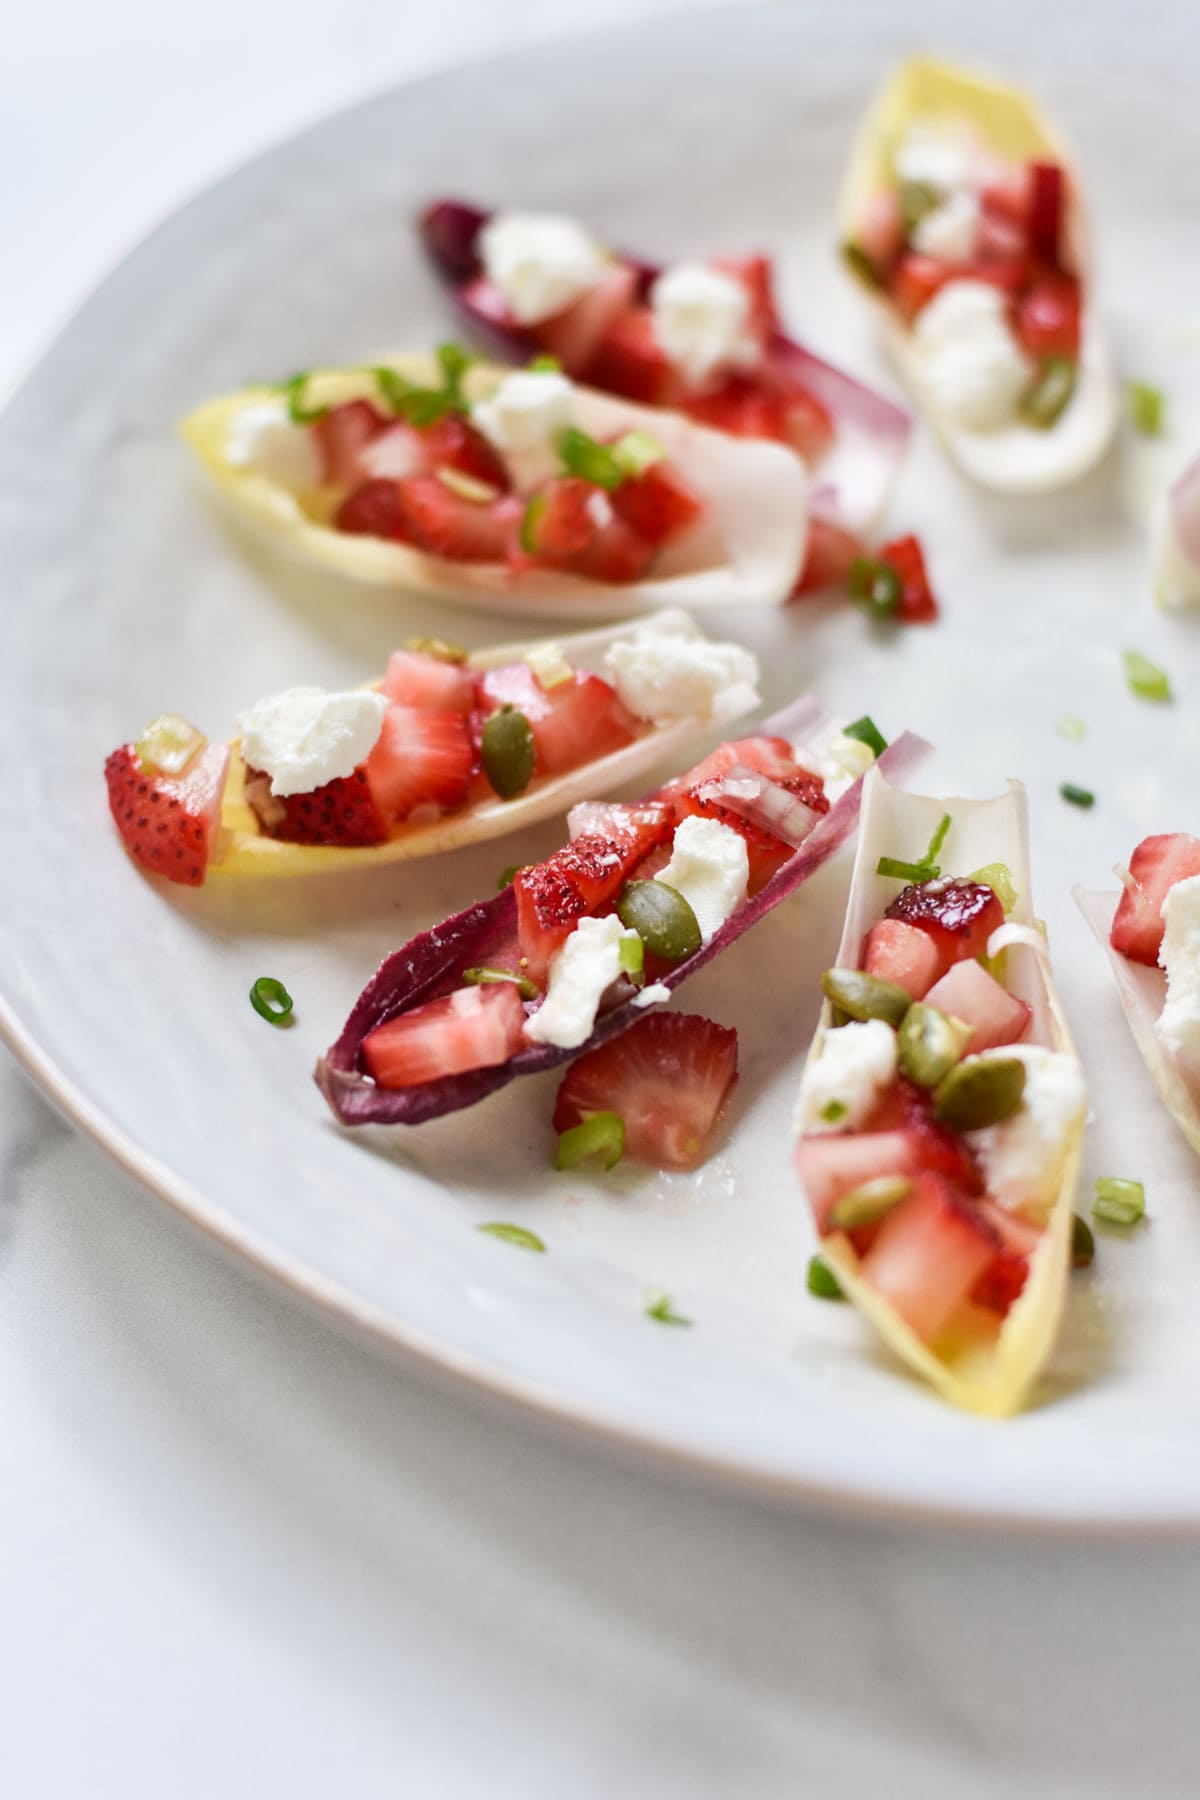 Stuffed endive appetizers topped with goat cheese.